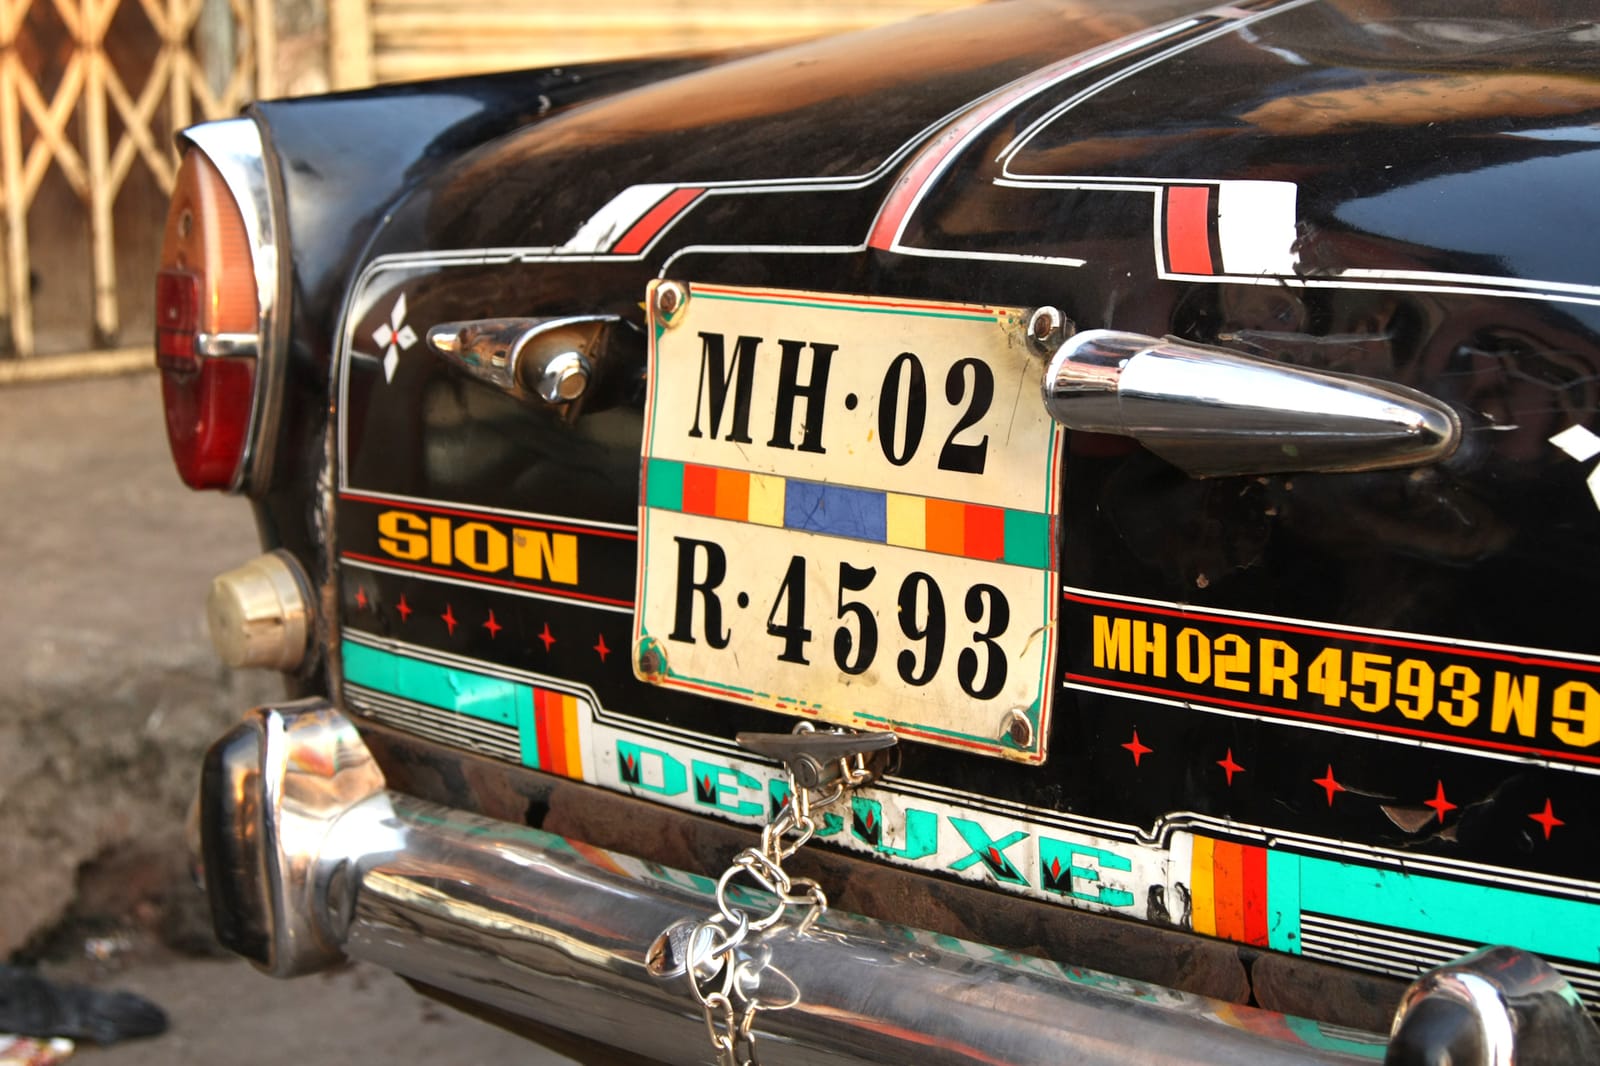 Rear end of a vintage black car with a prominent number plate and then painted decorations, including pinstriping and lettering that repeats the registration number.